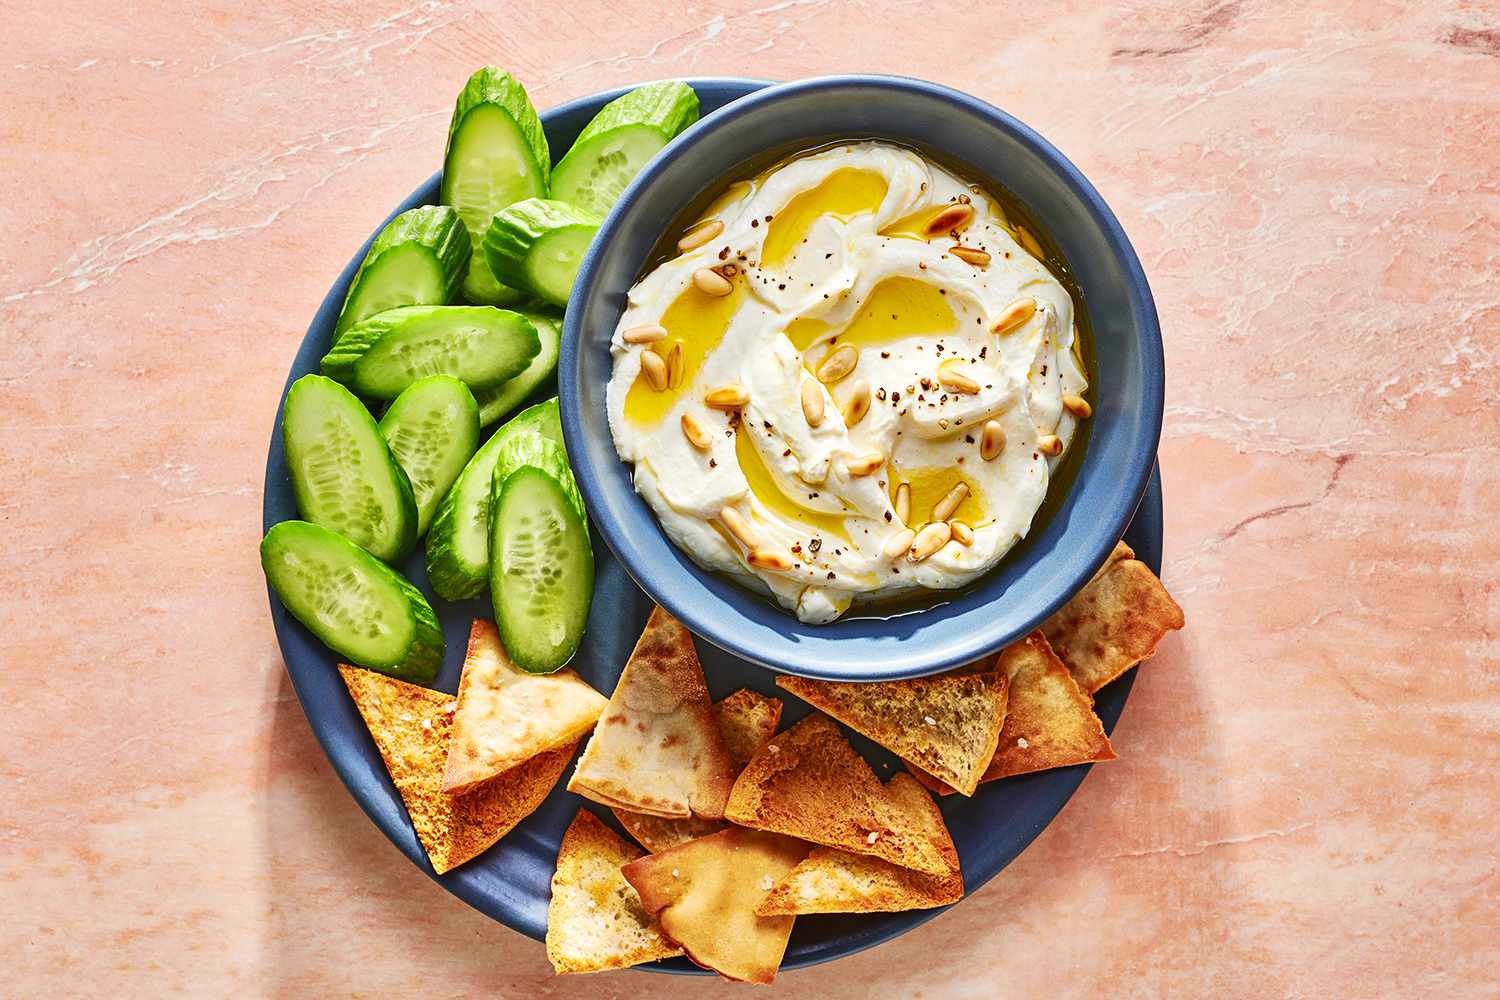 A bowl of whipped feta topped with pine nuts, olive oil and black pepper served with cucumbers and pita